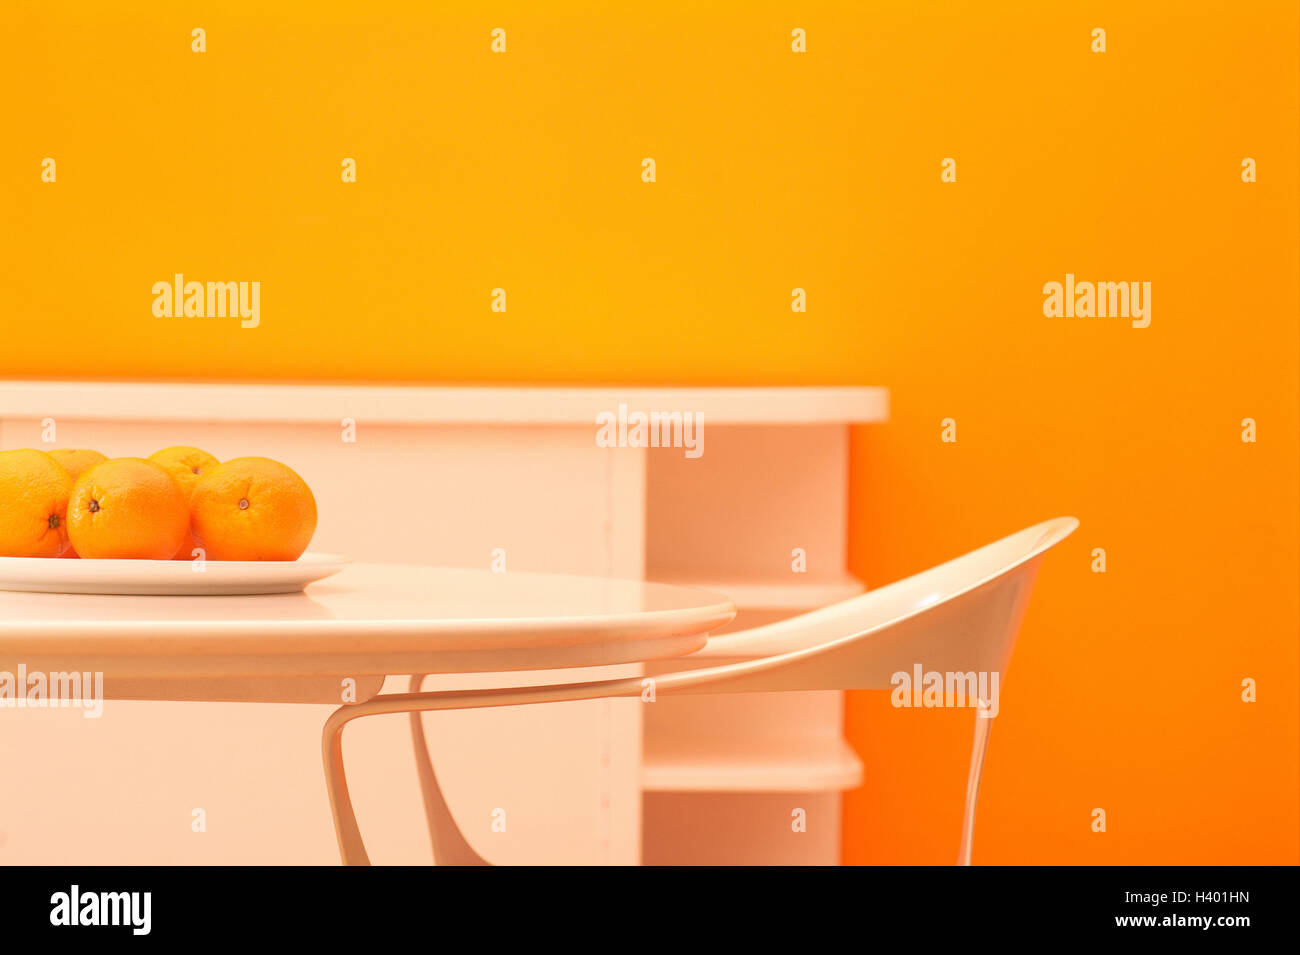 Room, chair, table, oranges, Sideboard, detail, room, living space, wall orange, St. furniture white, setup, modern, sterilely, dining table, plate, fruit plate, fruits, fruit, oranges, citrus fruits, conception, inside Stock Photo